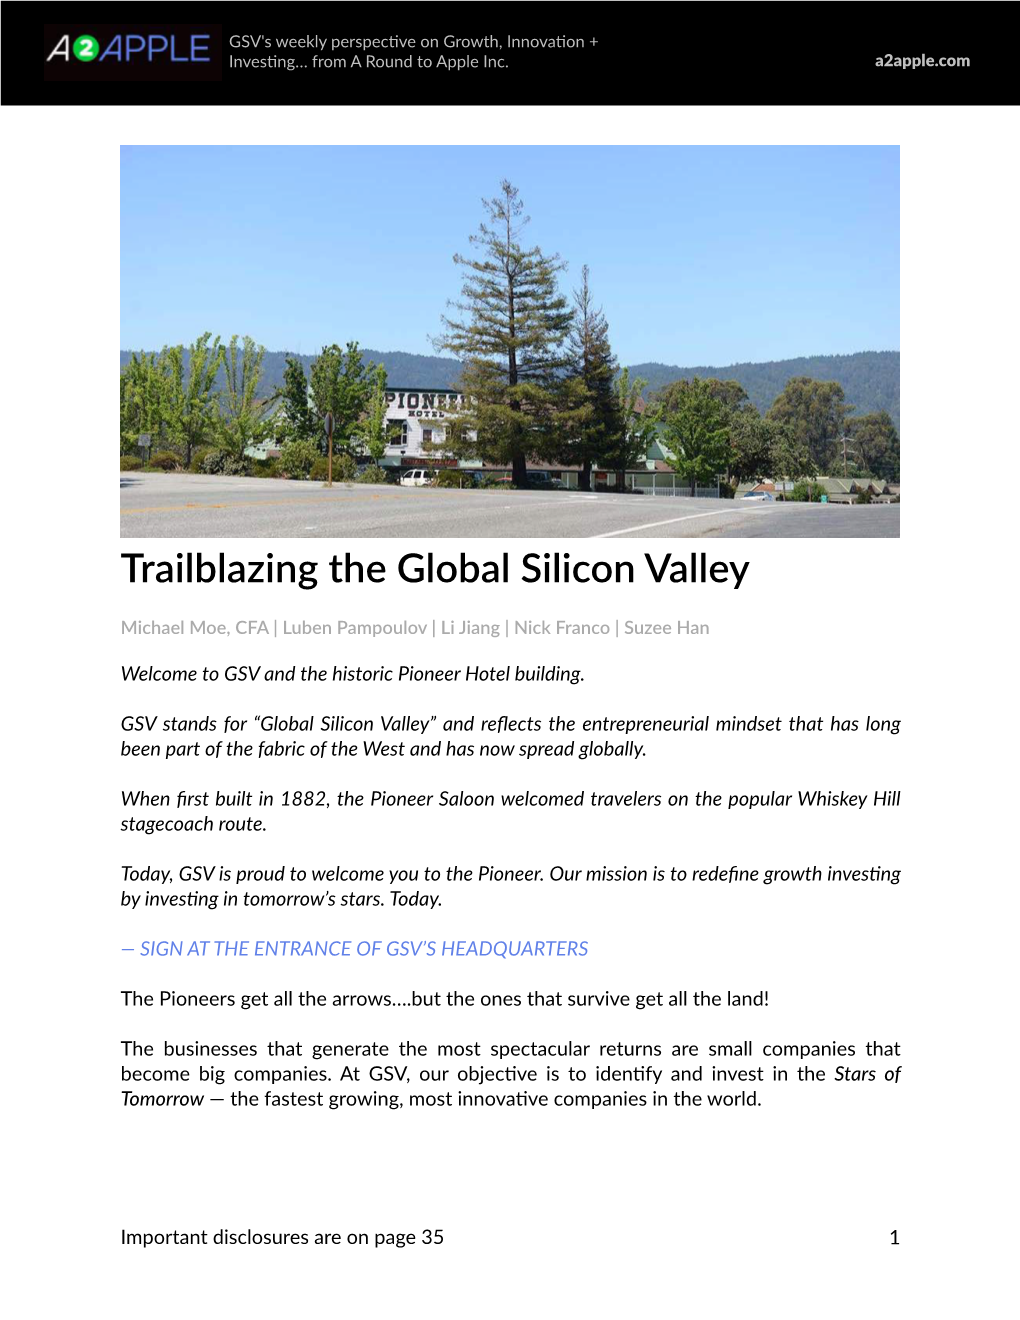 Trailblazing the Global Silicon Valley